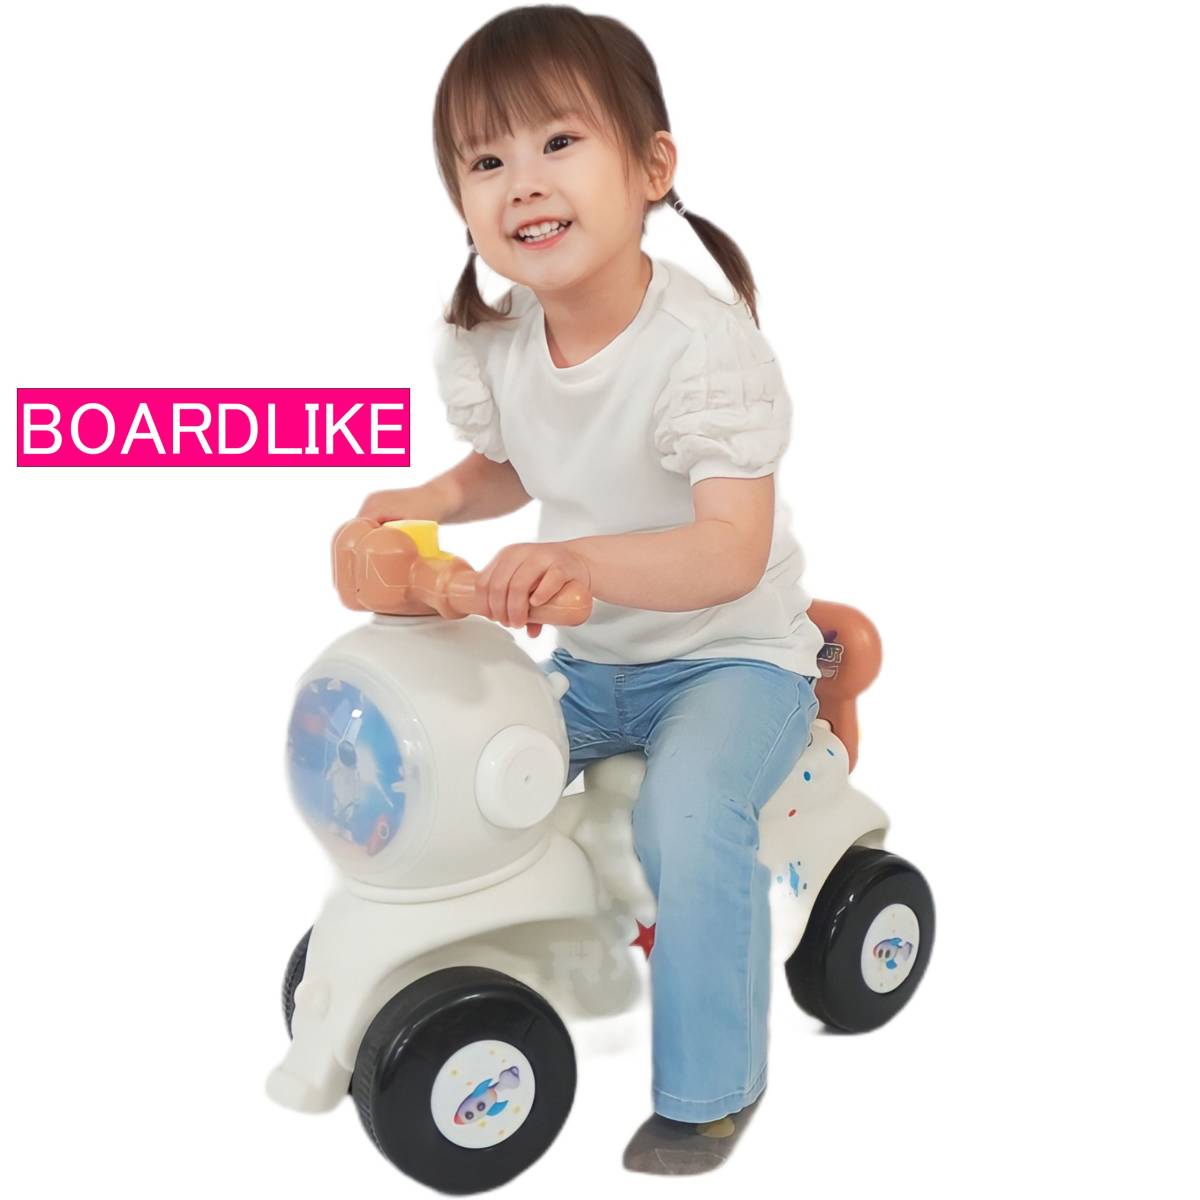 880% off . prompt decision 2WAY# pair .. passenger use # baby-walker #10 pcs limit # baby War car # board Like # handcart # rocking chair -# wooden horse # white color limitation 